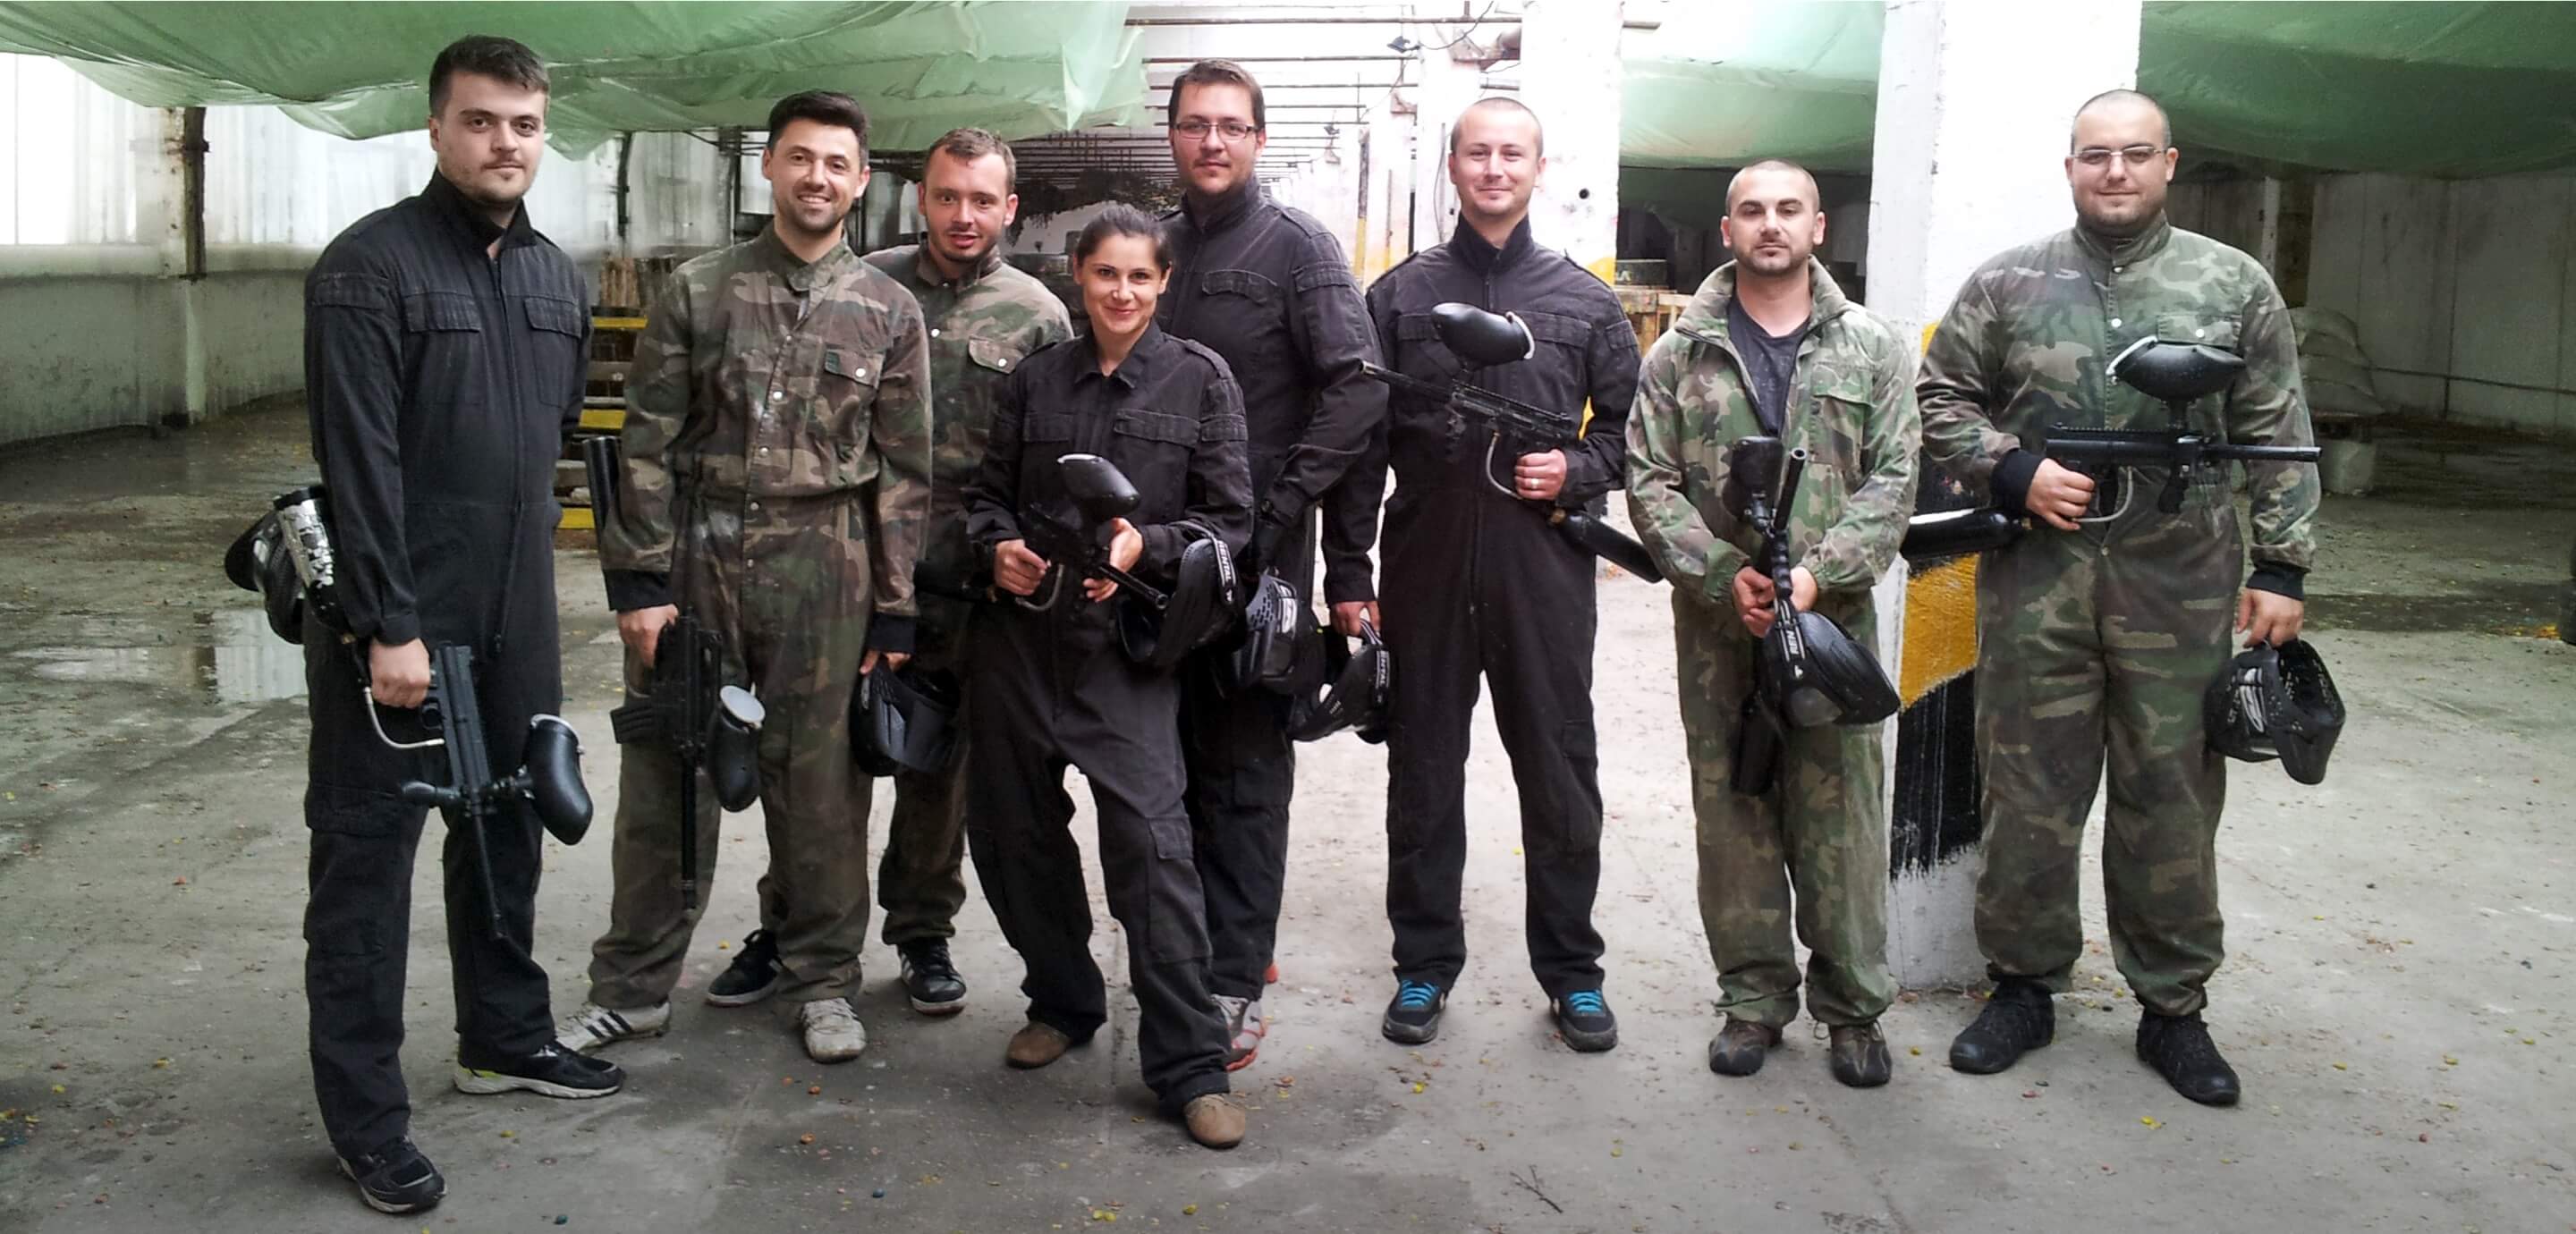 Office - Oradea - Competitive even at Paintball